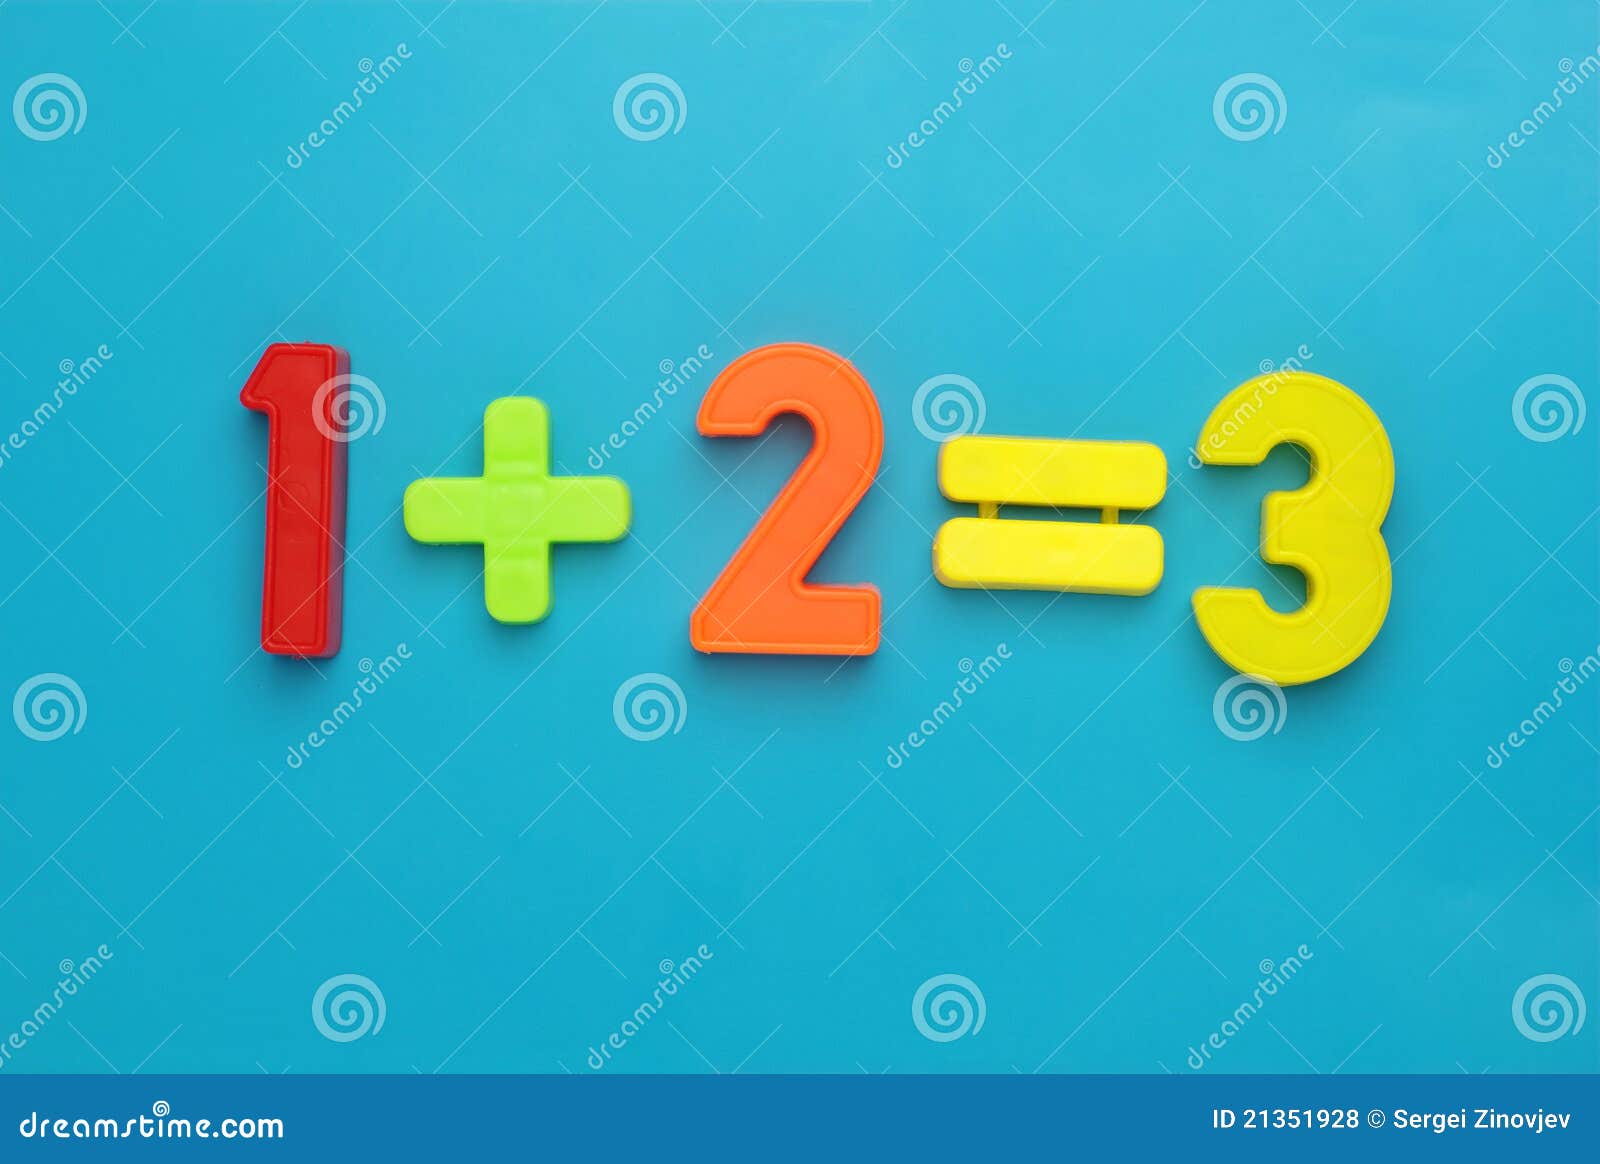 One plus two equals three. stock photo. Image of playing - 21351928 1 2 Plus What Equals 2 3